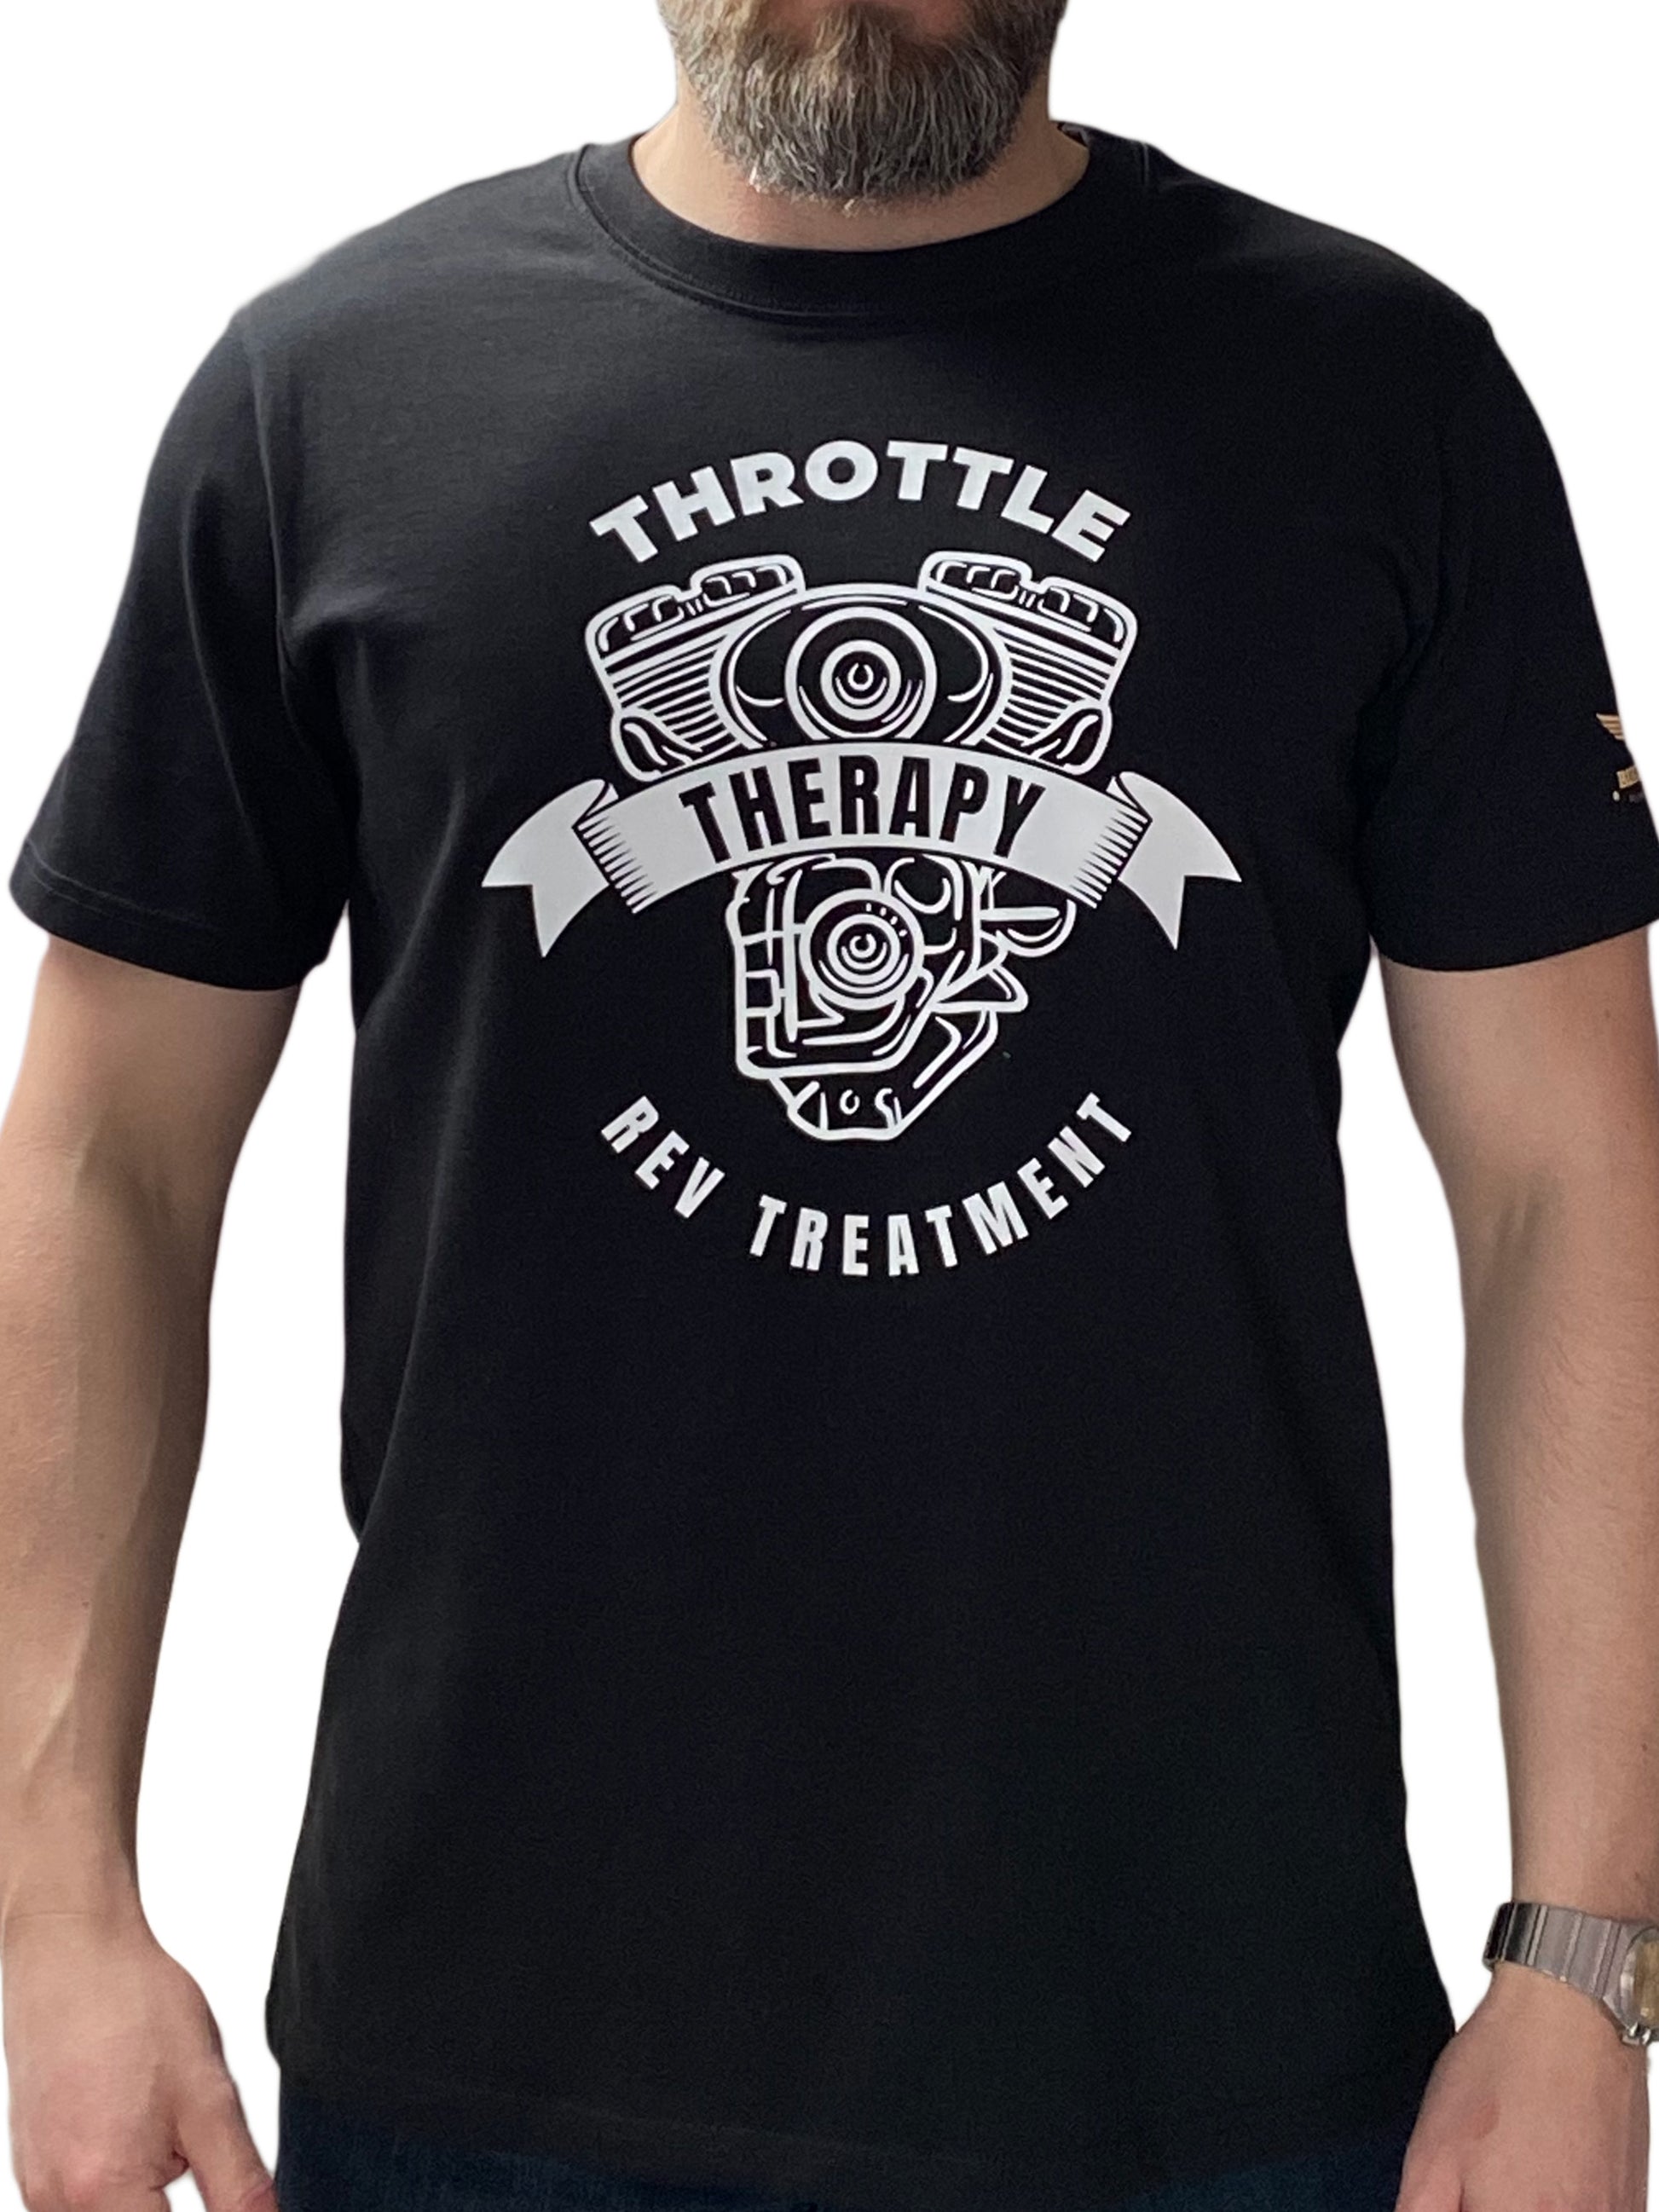 Motorcycle shirt Bikesaint Throttle Therapy black short sleeve front zoom